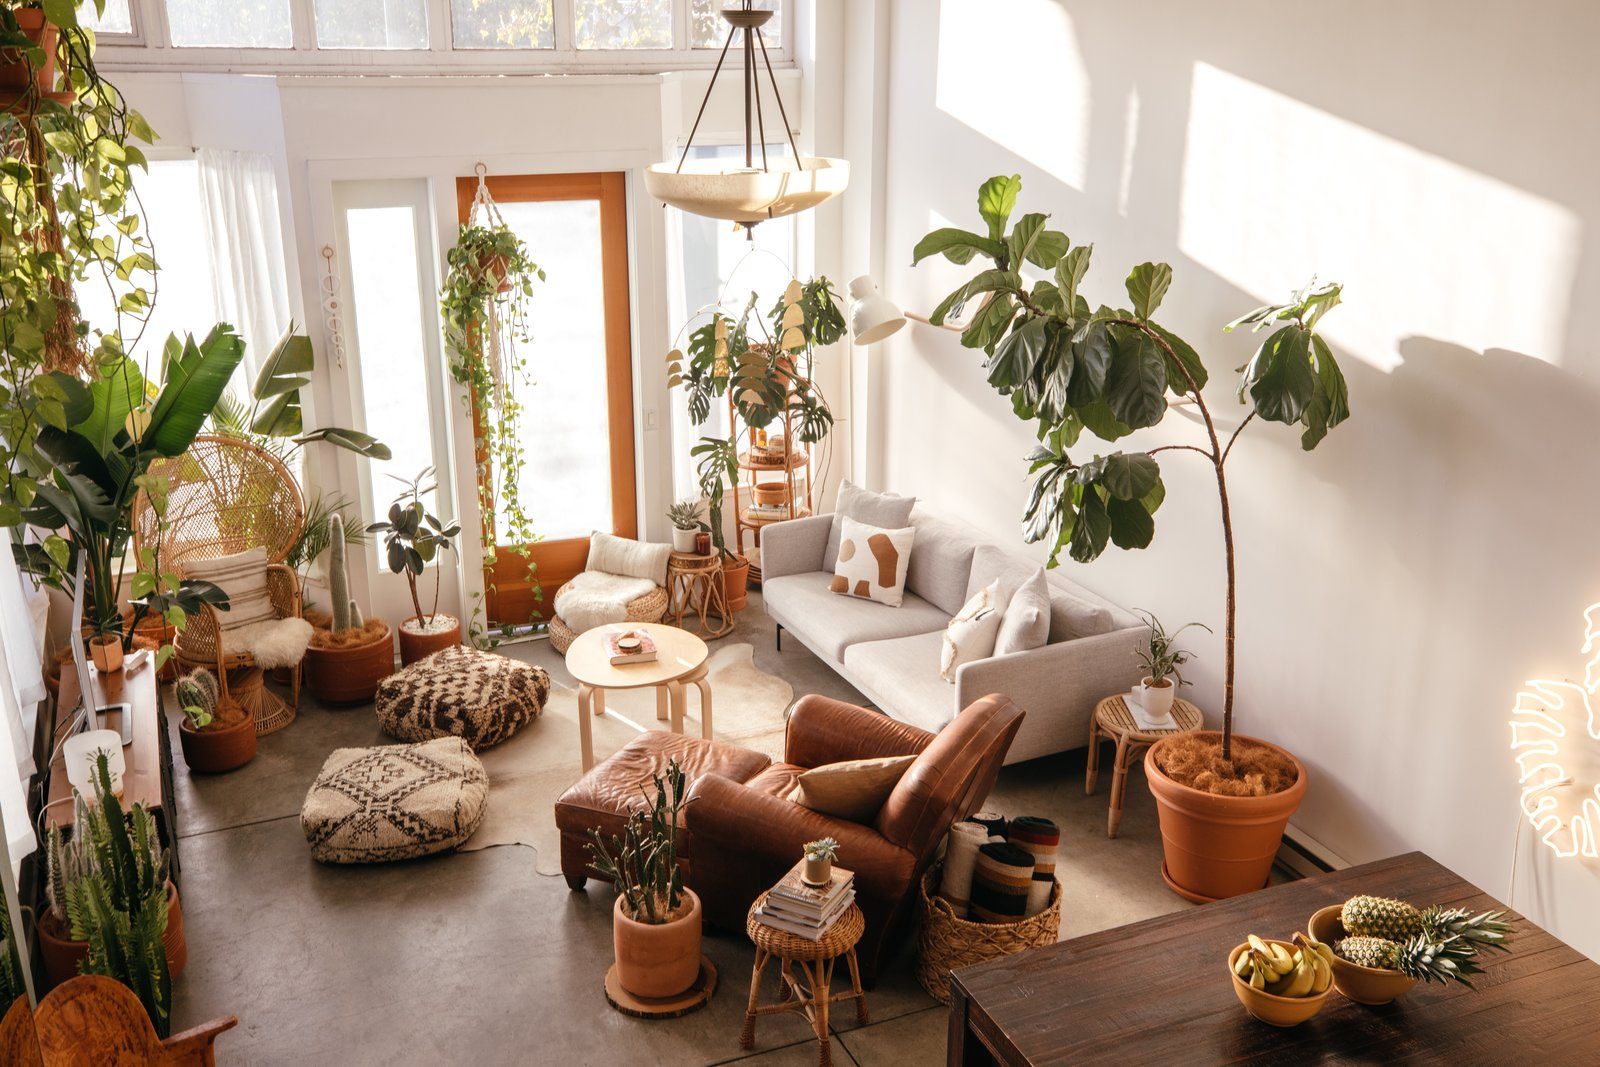 My House: An Creative Couple’s Live/Work Loft Is Full of Sunny, Southwestern Vibes